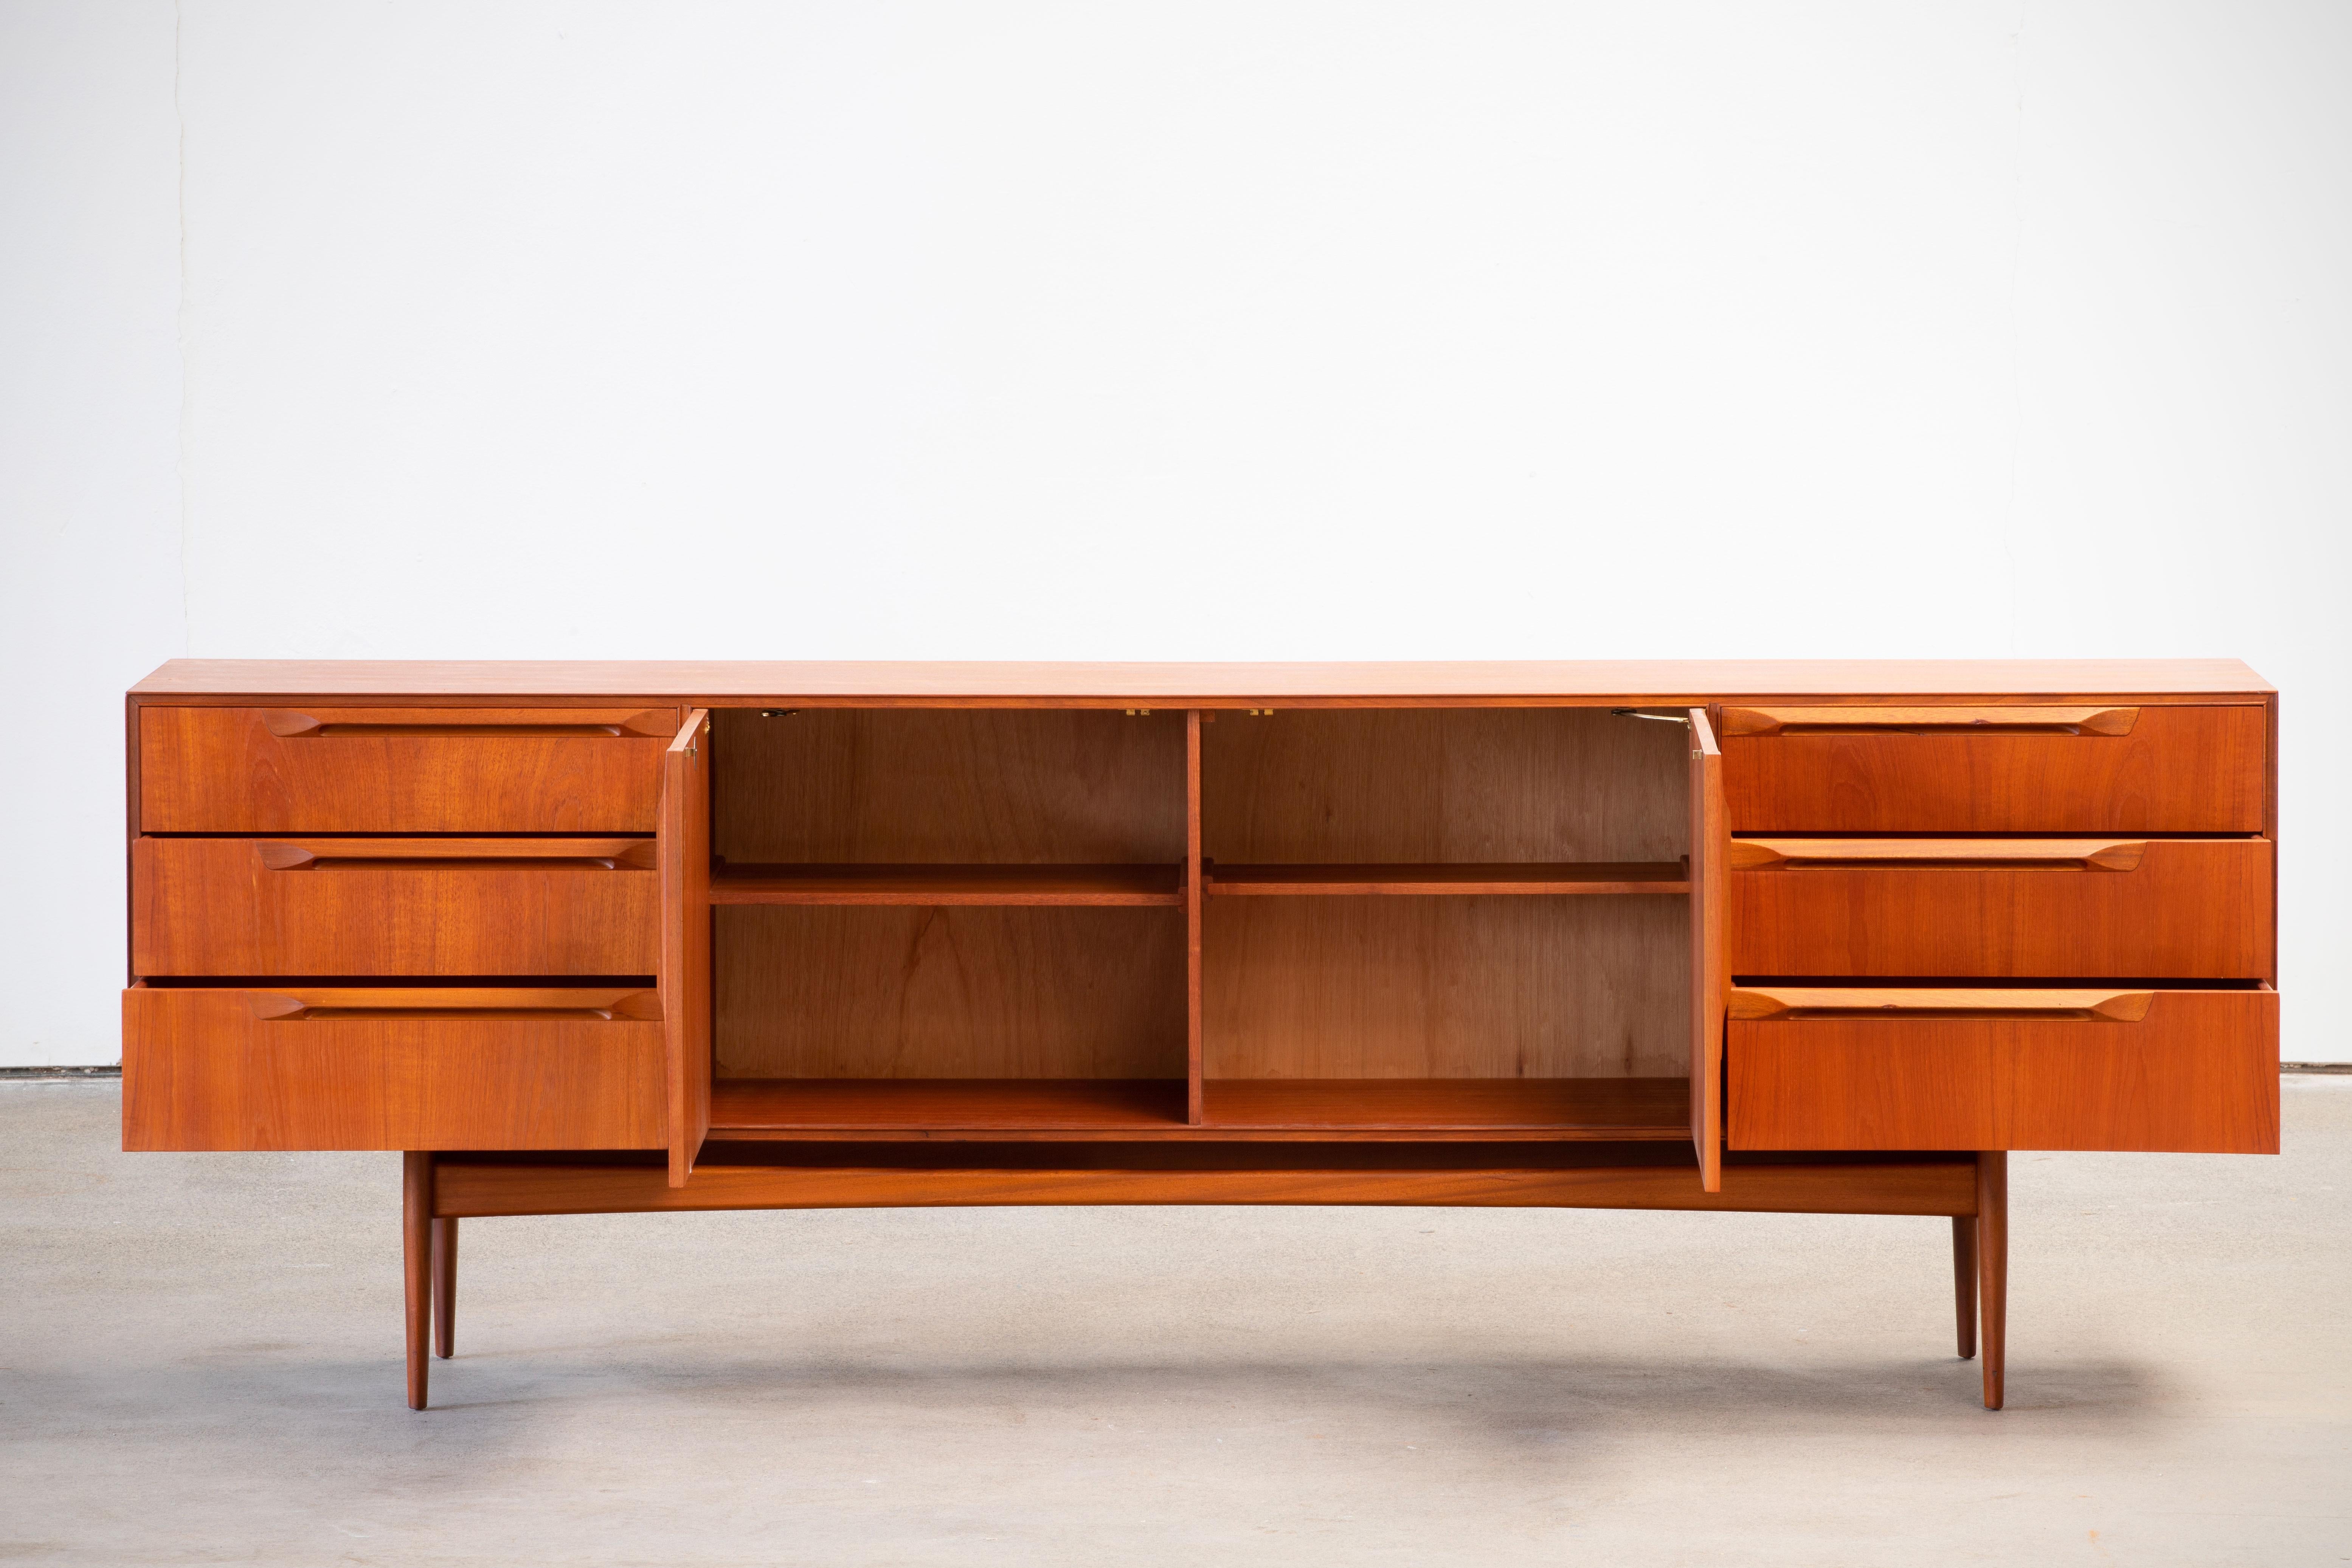 This beautiful vintage modern rosewood sideboard features plenty of room for storage within its six drawers and two large storage compartments hidden by cabinet doors. Sleek two-tone design with unique carved pulls and tapered legs adding to the